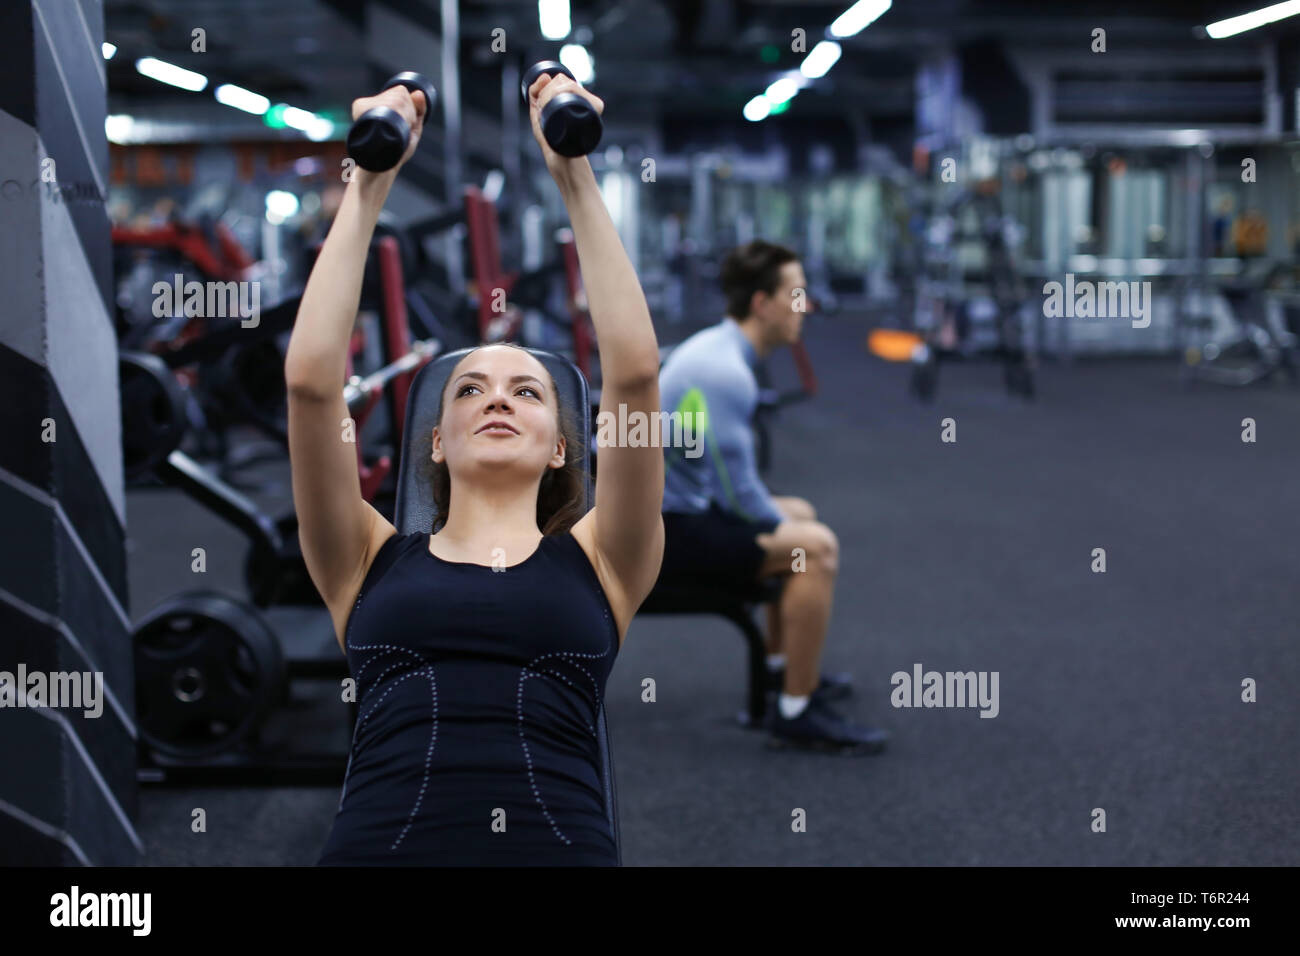 Young woman doing exercises with dumbbells in gym Stock Photo